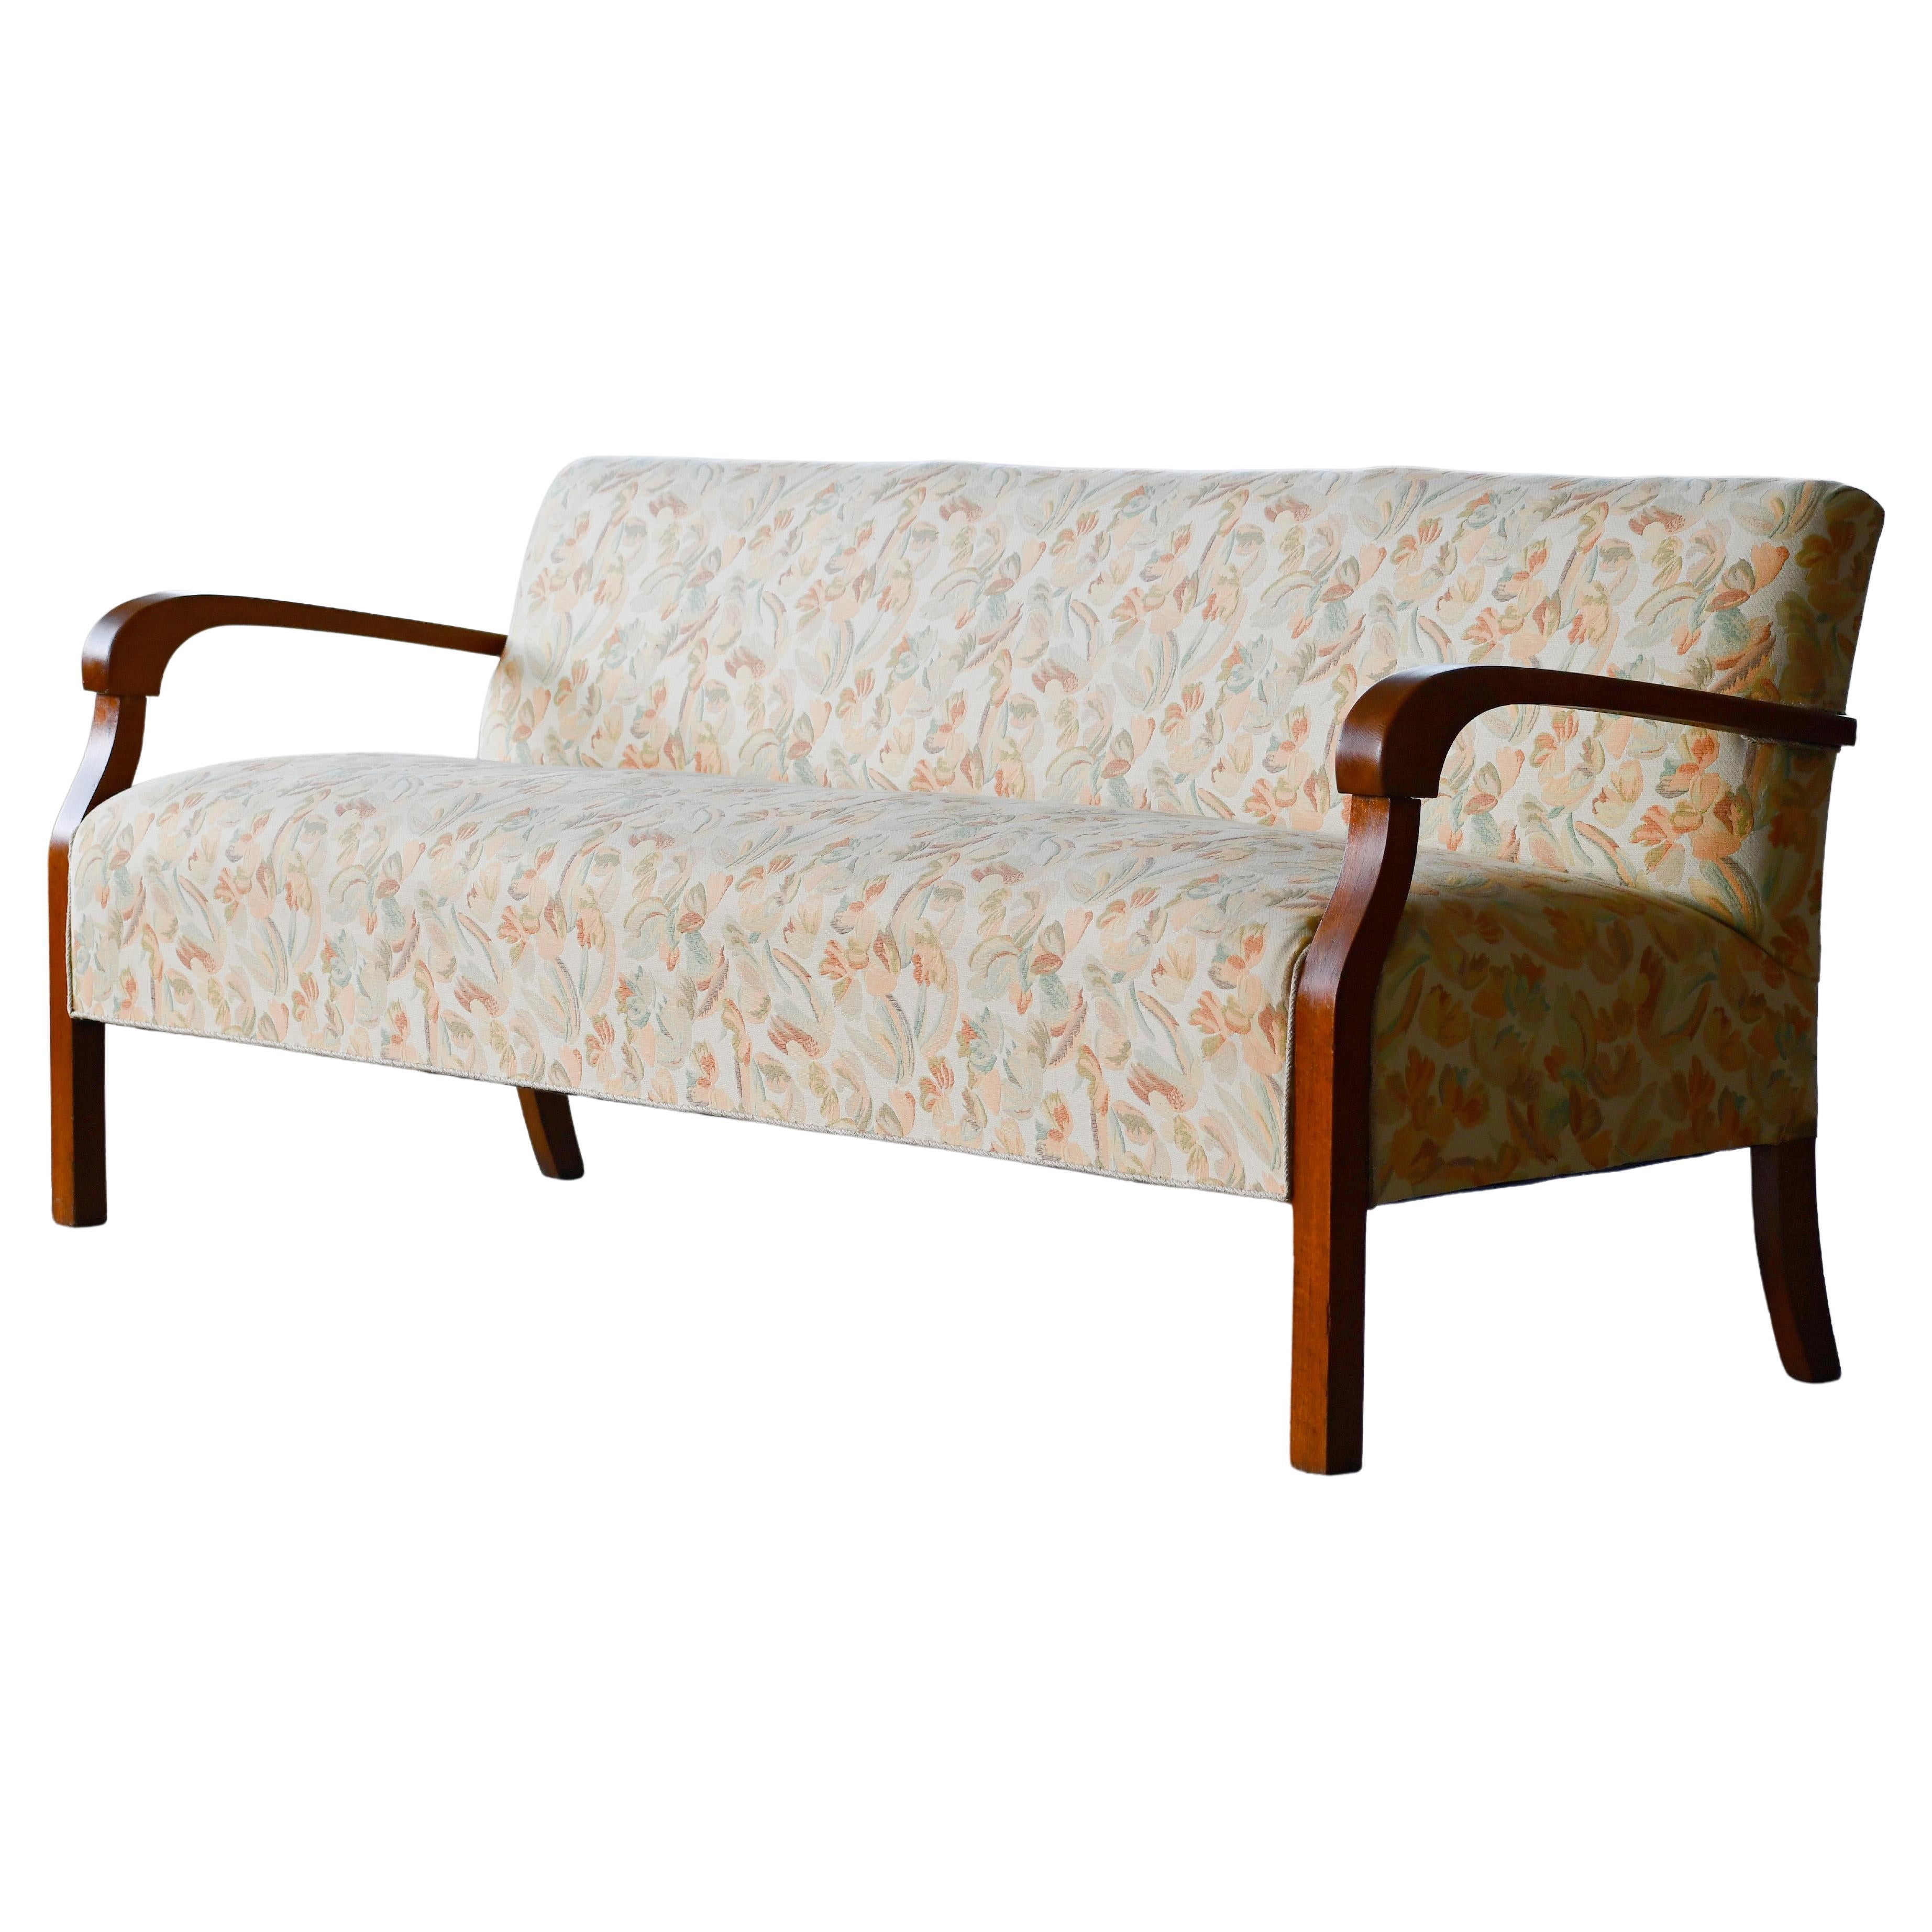 Danish Art Deco Sofa with Open Wooden Armrests, 1930's For Sale